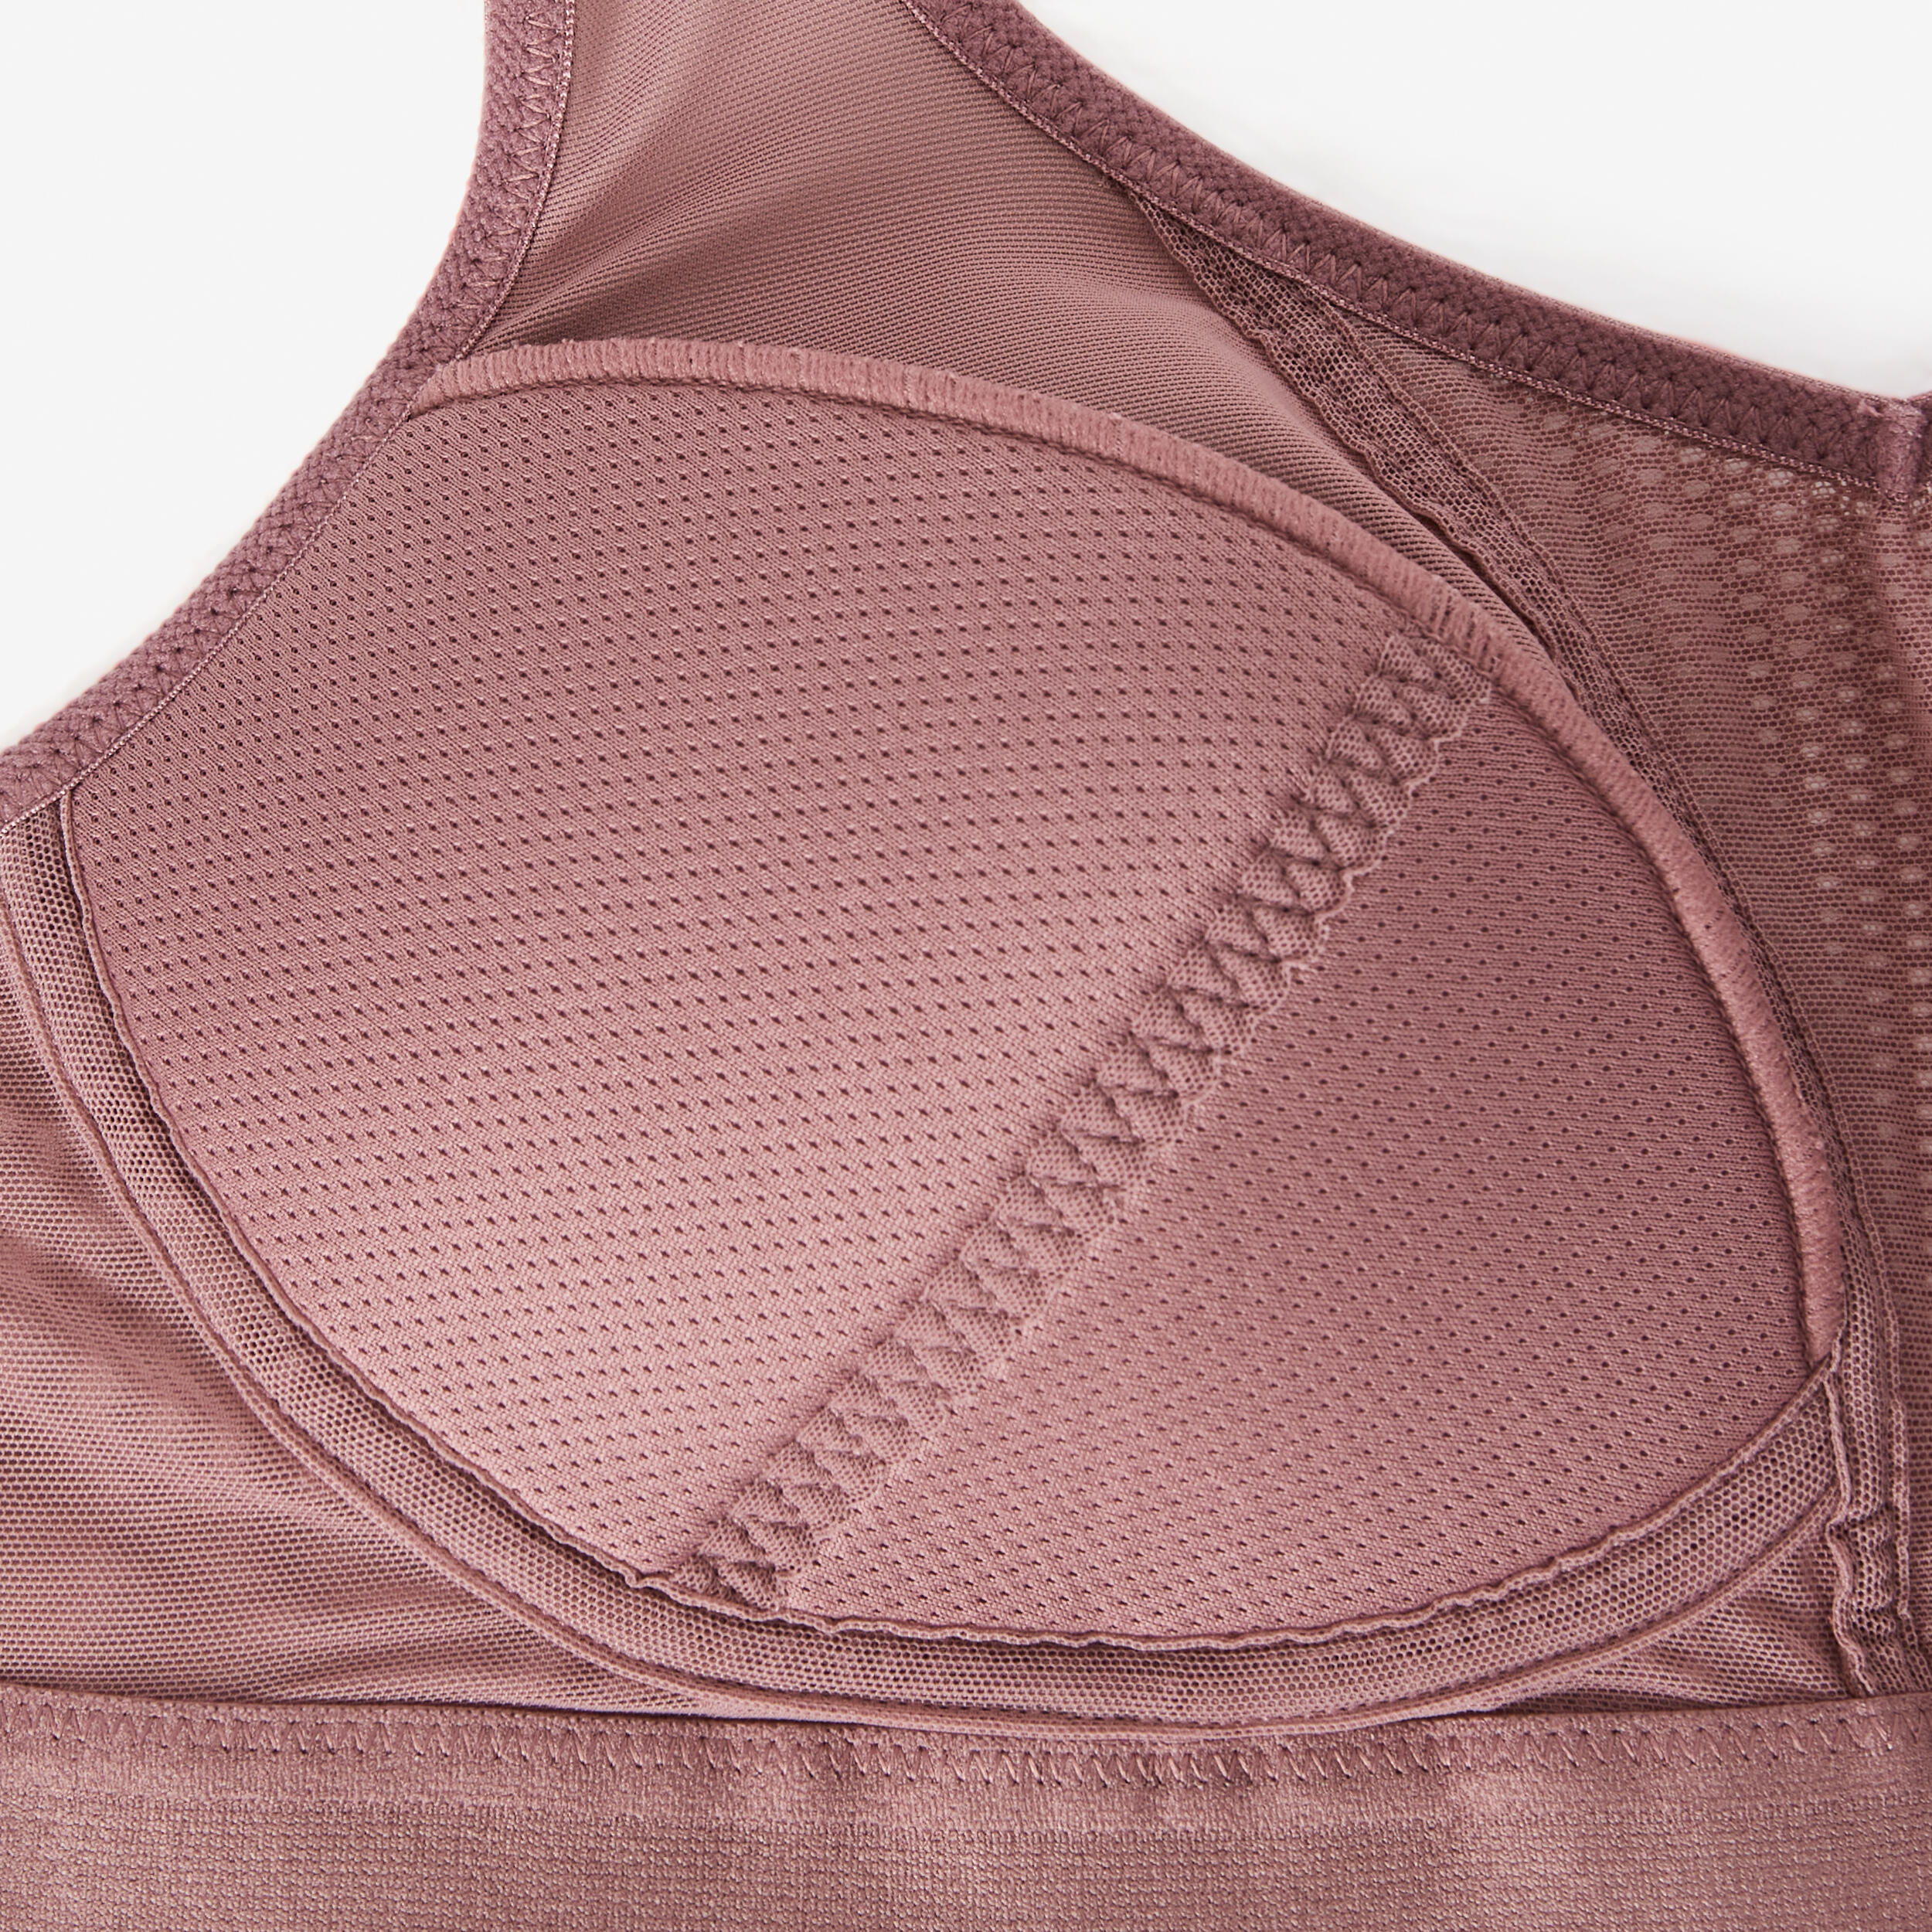 Women's High Support Bra with Crossed Straps - Taupe Pink 10/12